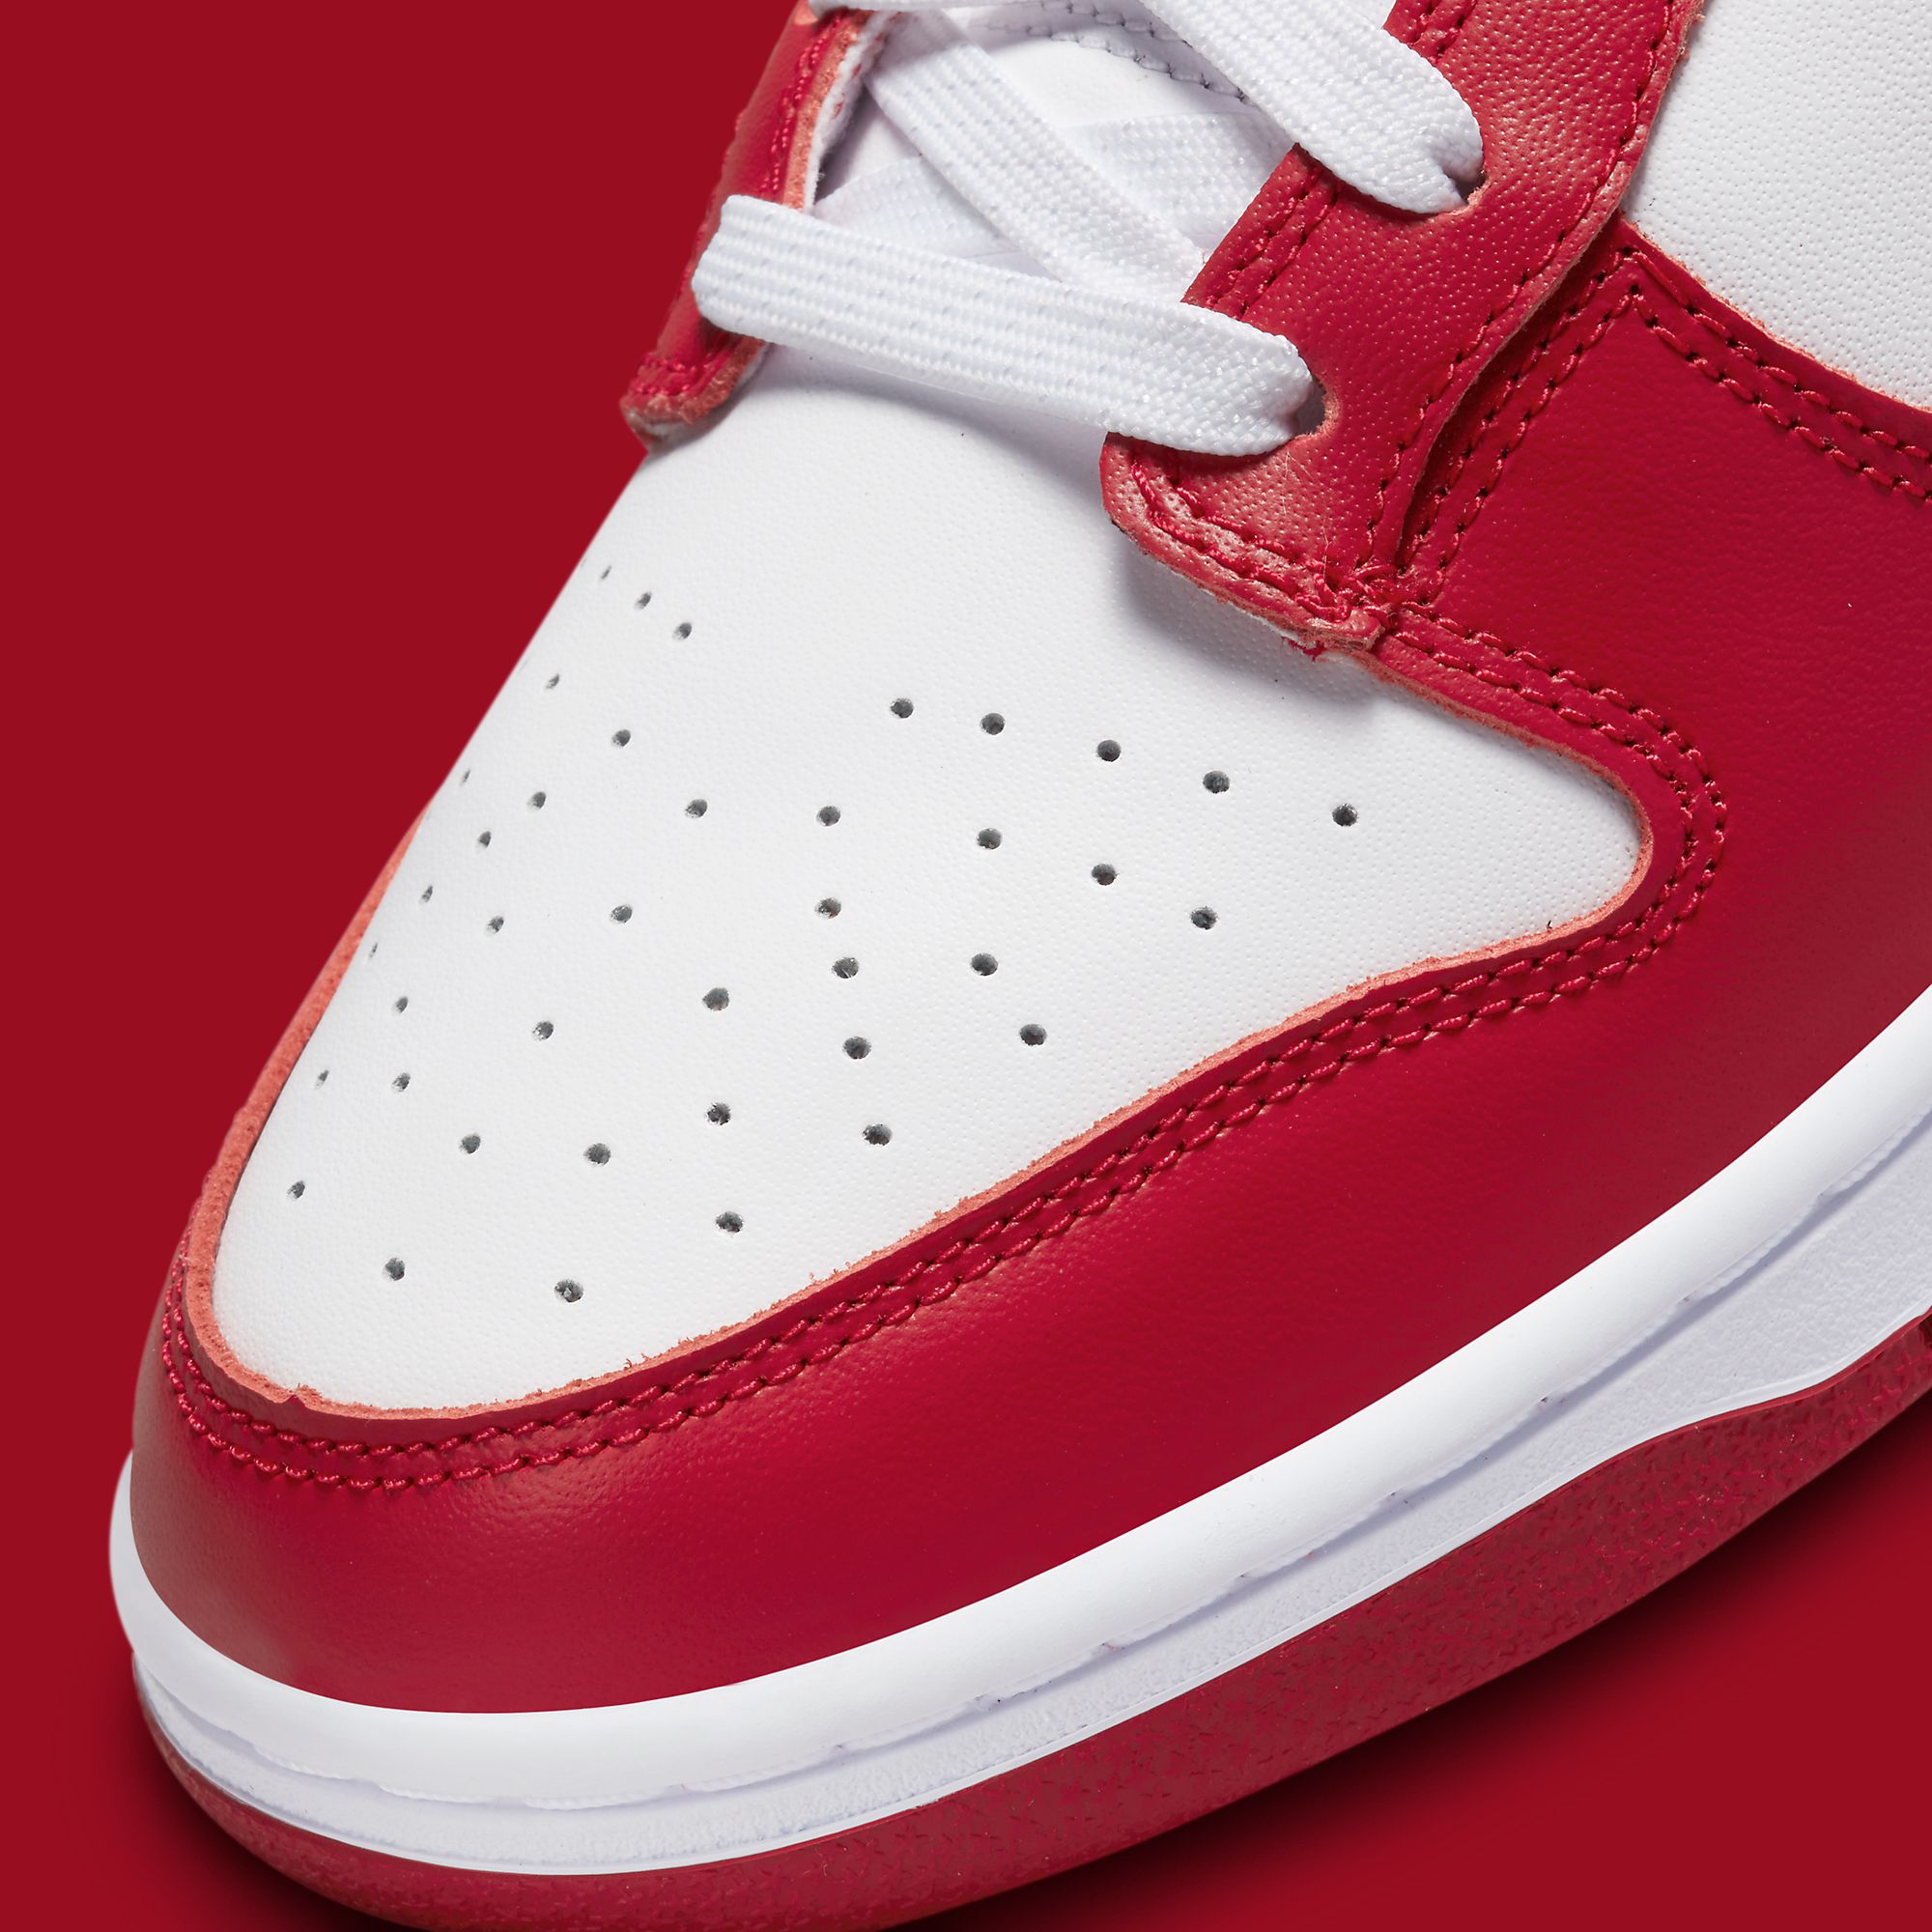 Hit the Gym in the Nike Dunk Low 'Gym Red' - Sneaker Freaker